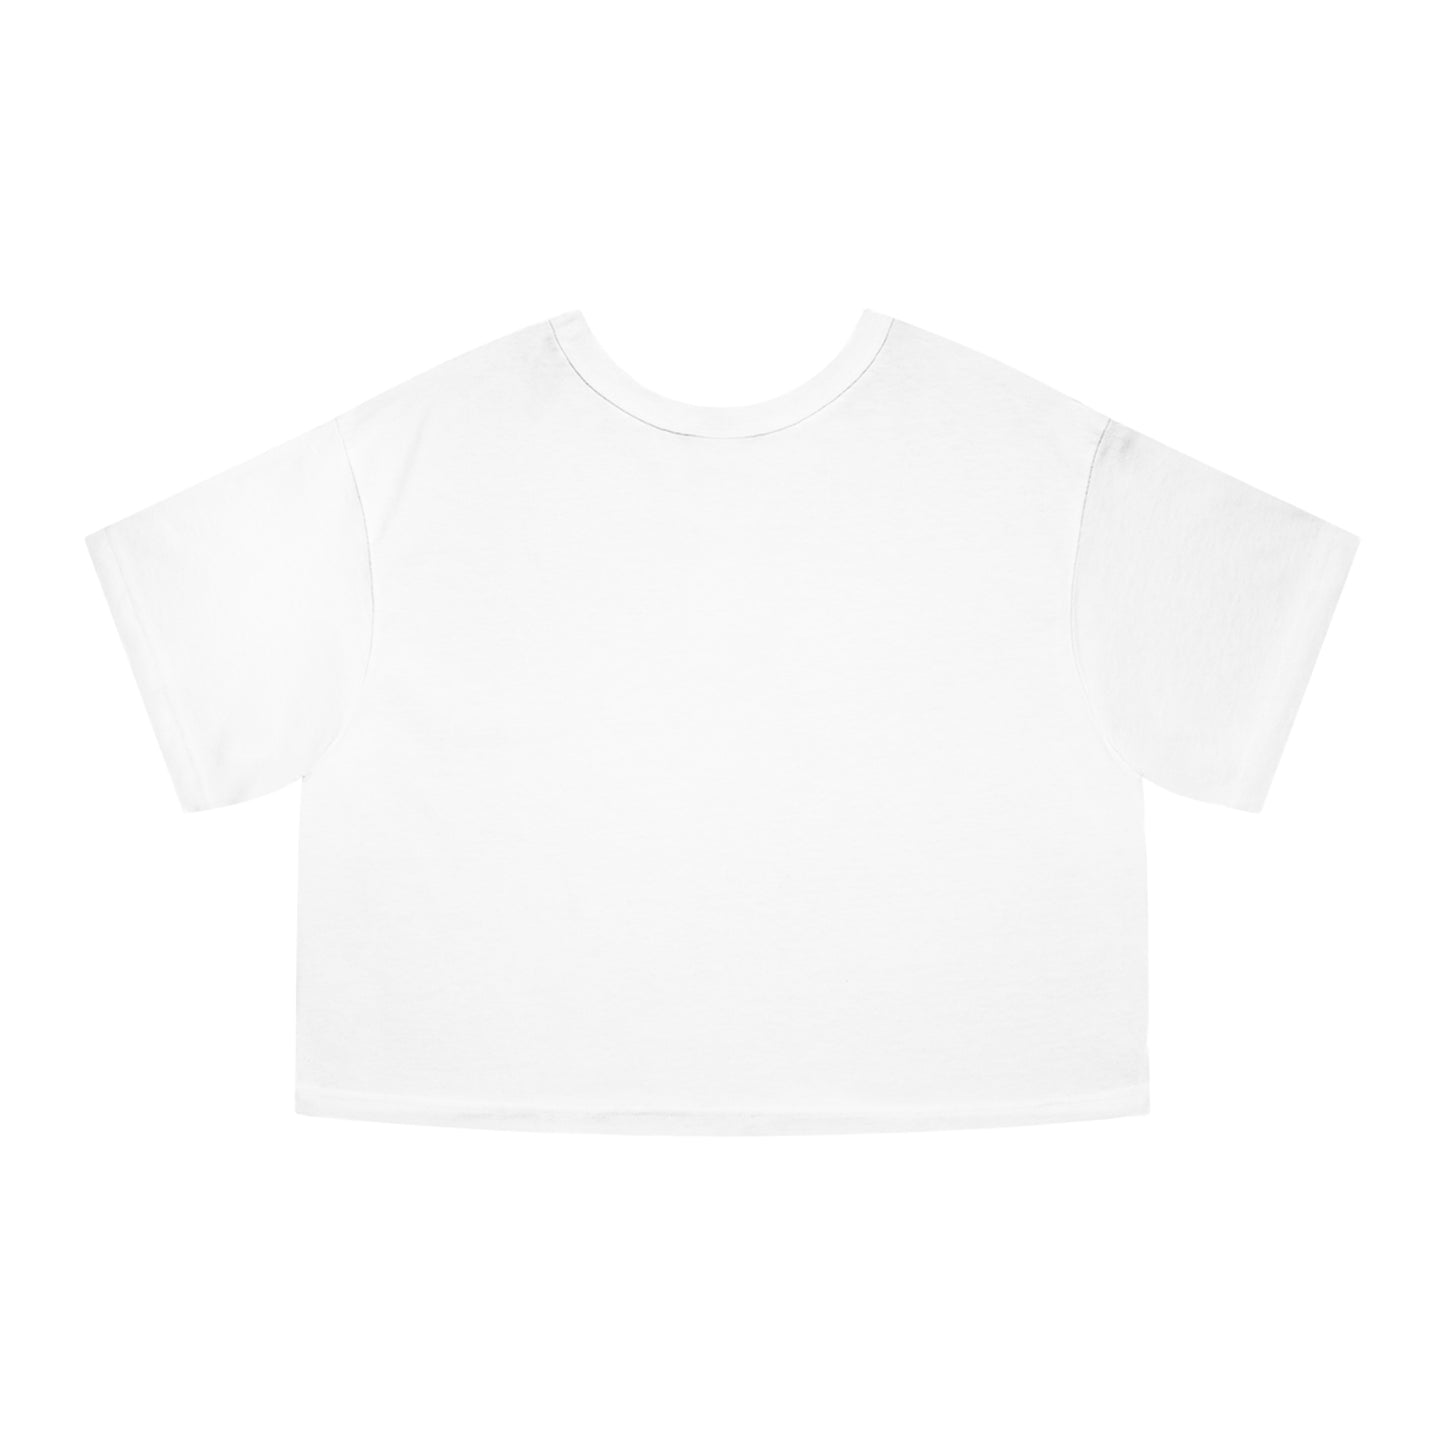 Twink 2 Cropped T-Shirt